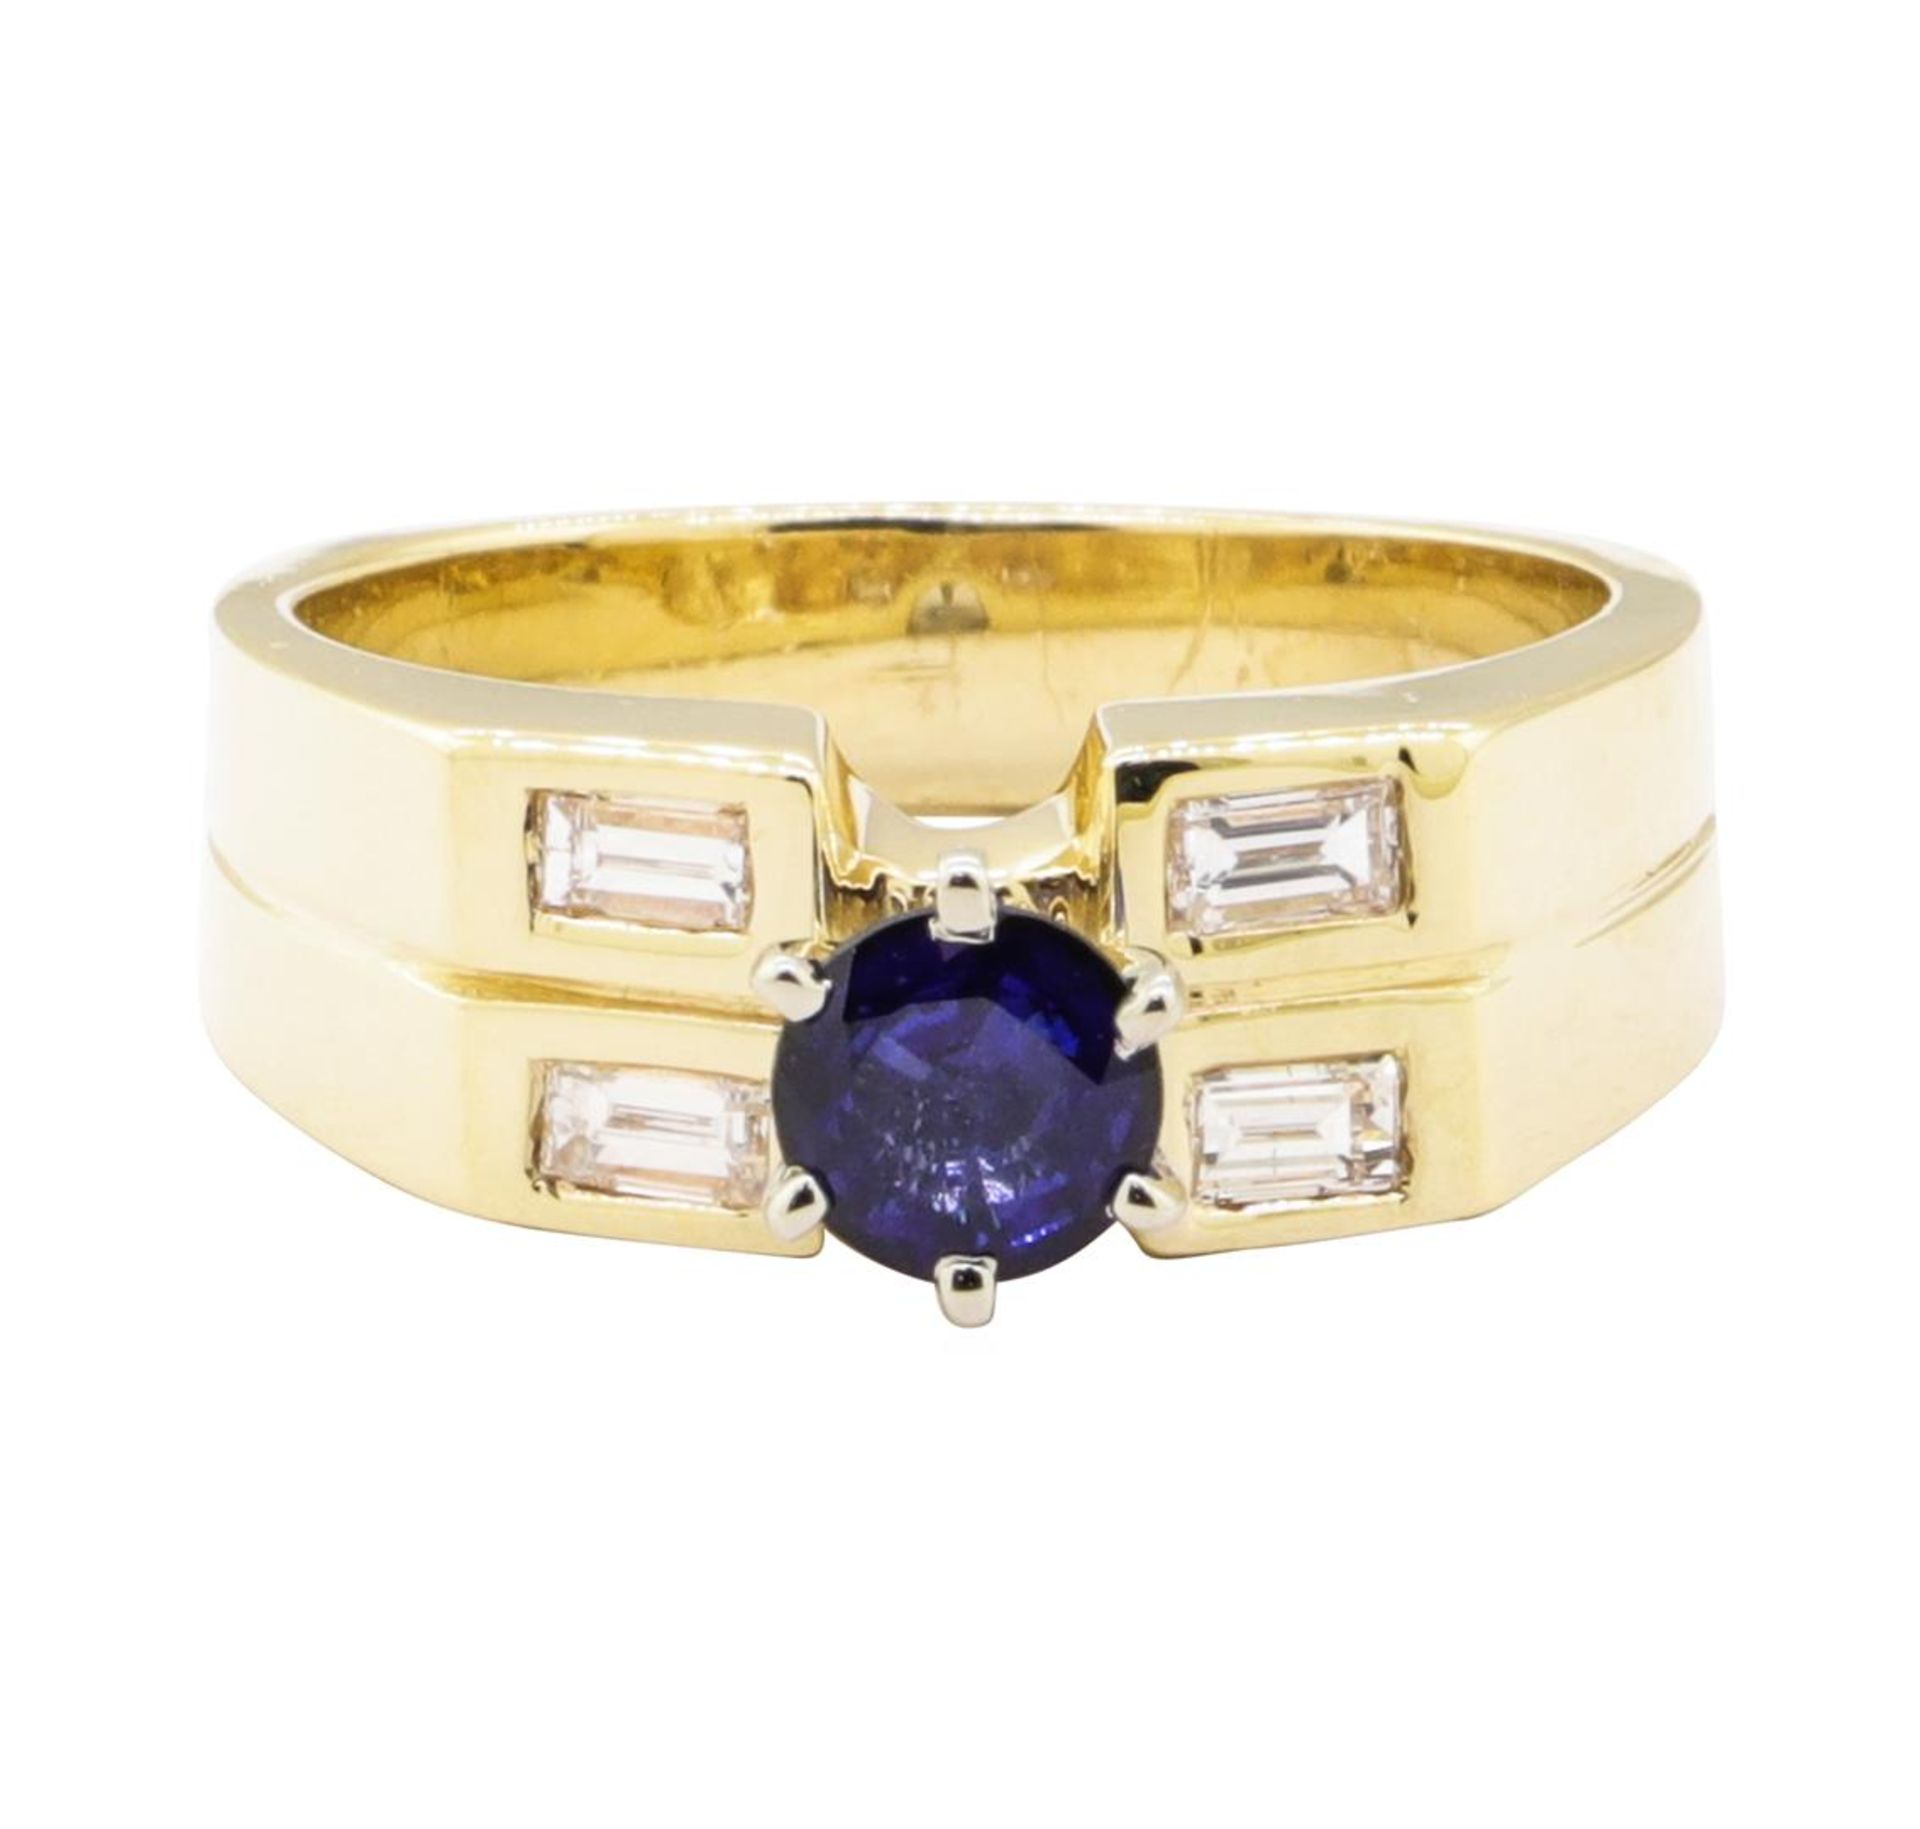 1.02ctw Blue Sapphire and Diamond Ring - 14KT Yellow Gold - Image 2 of 4